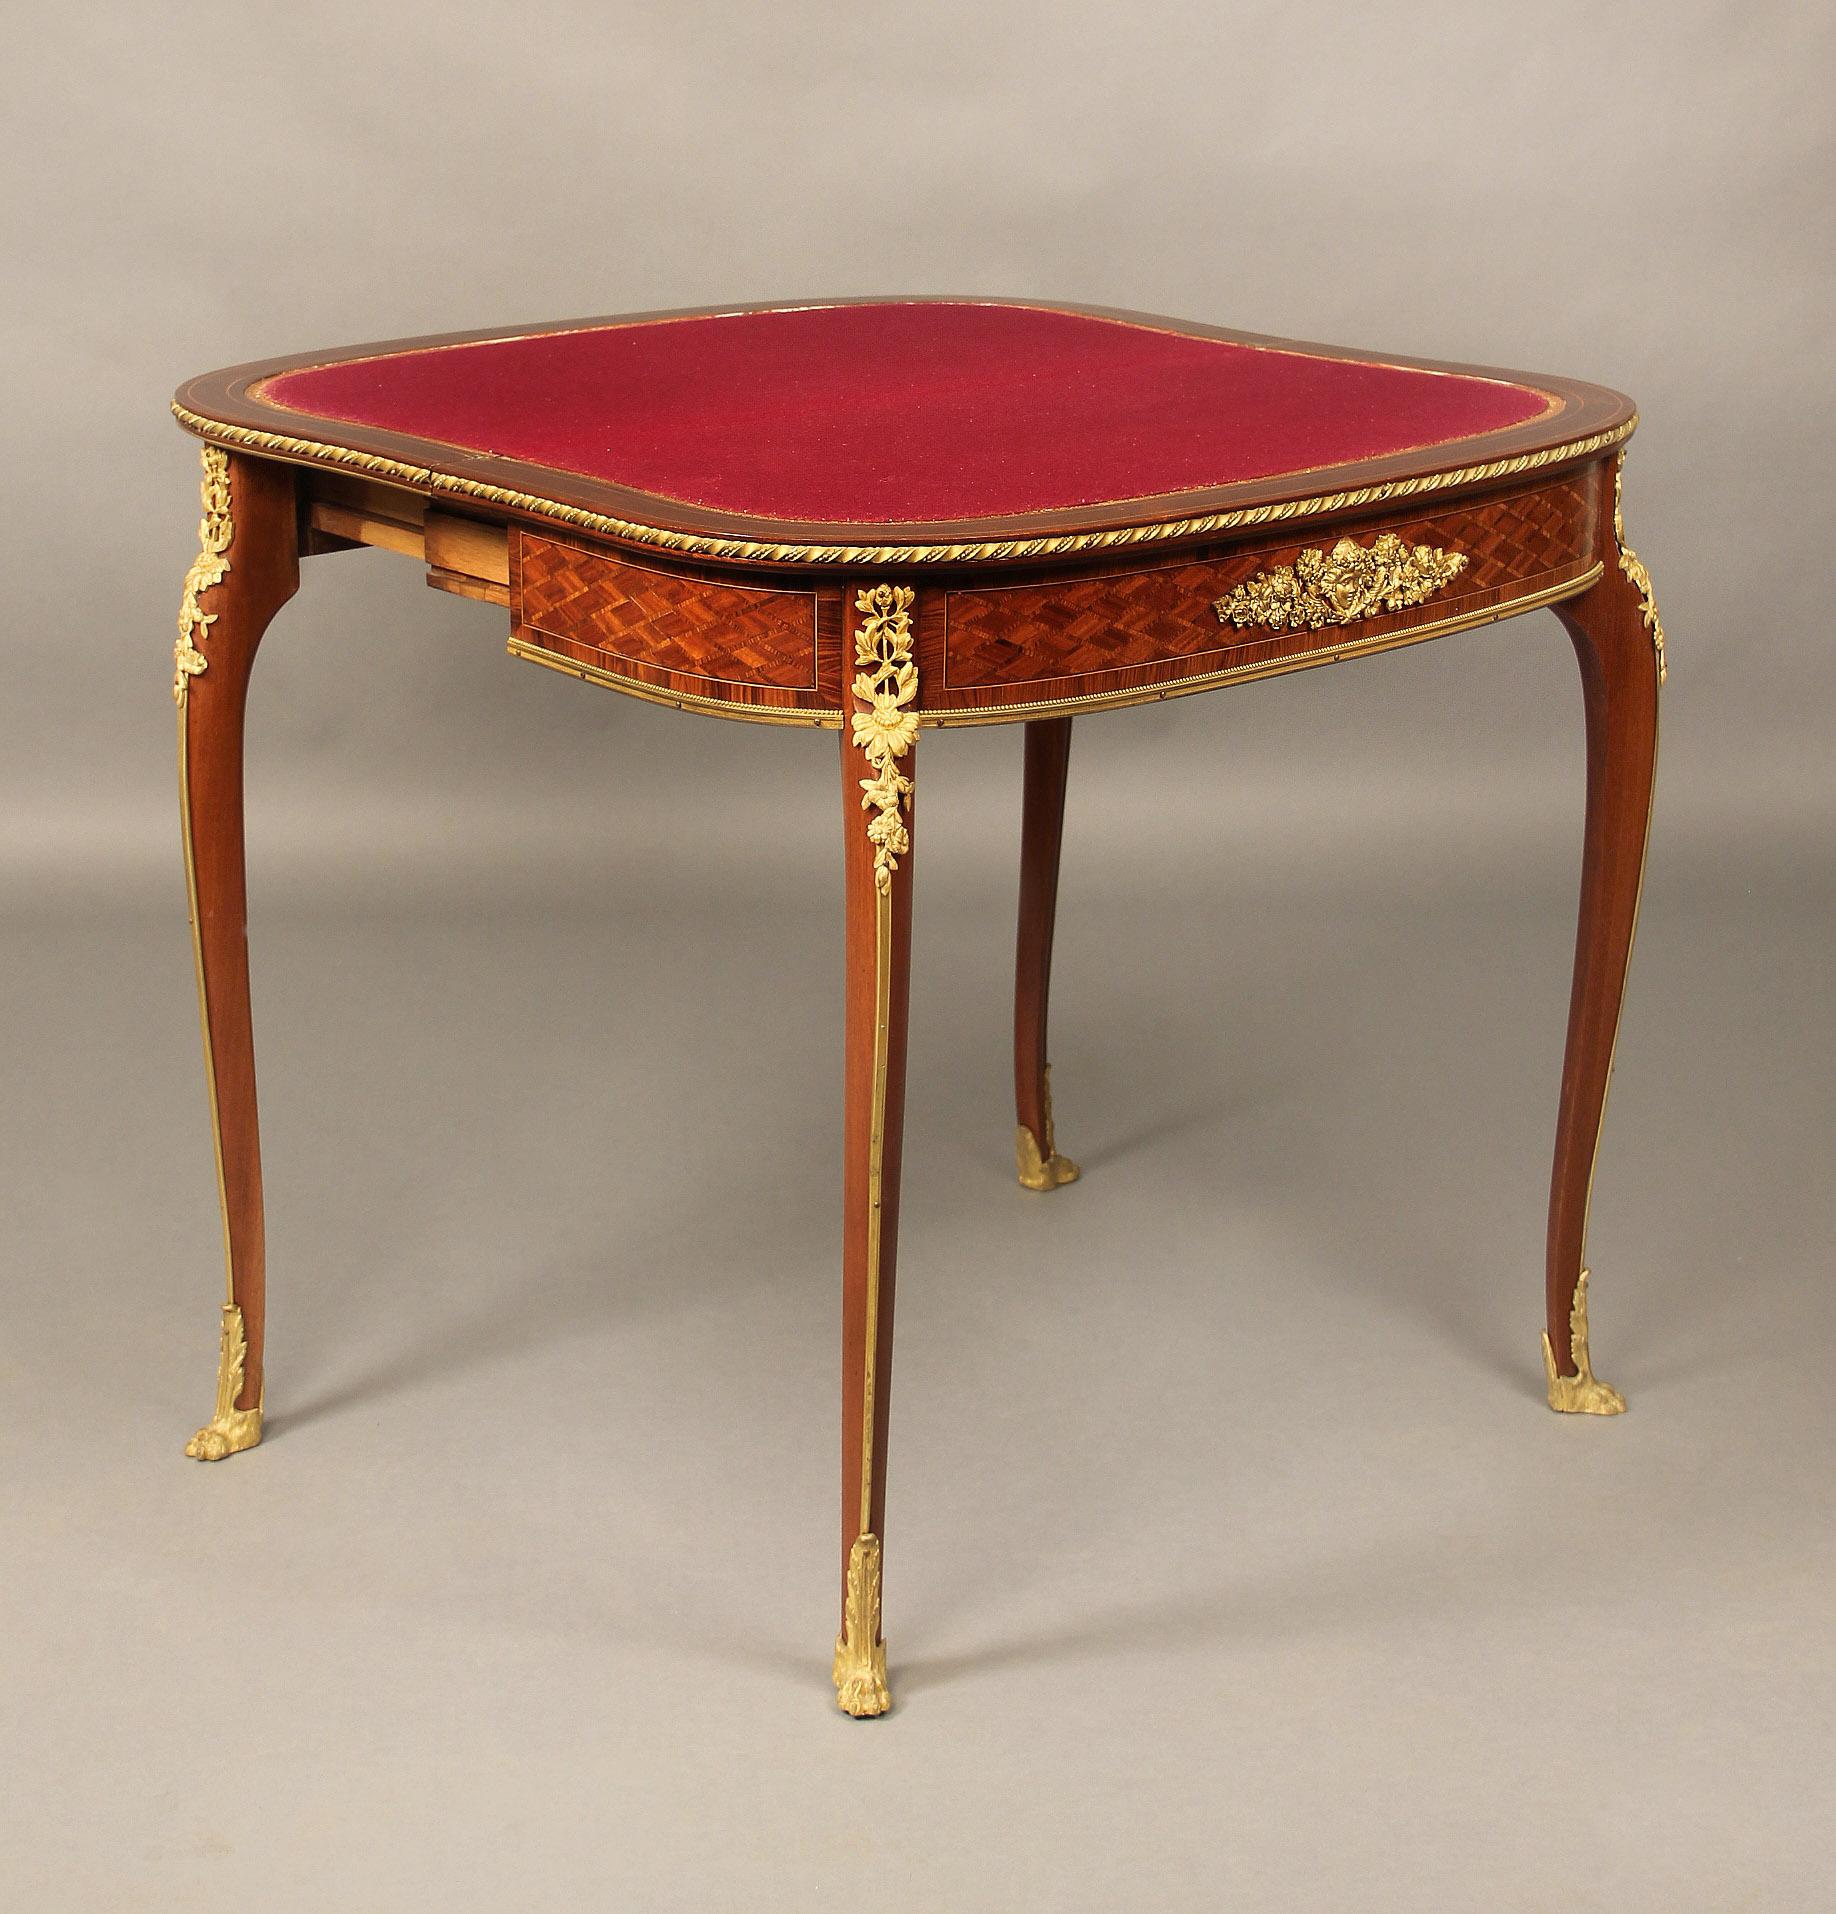 A late 19th century Louis XV style gilt bronze mounted mahogany, Kingwood and Satiné Parquetry card table

By François Linke

D-shaped hinged top with rope twist border opening up to reveal a felt lined playing surface, the front decorated with